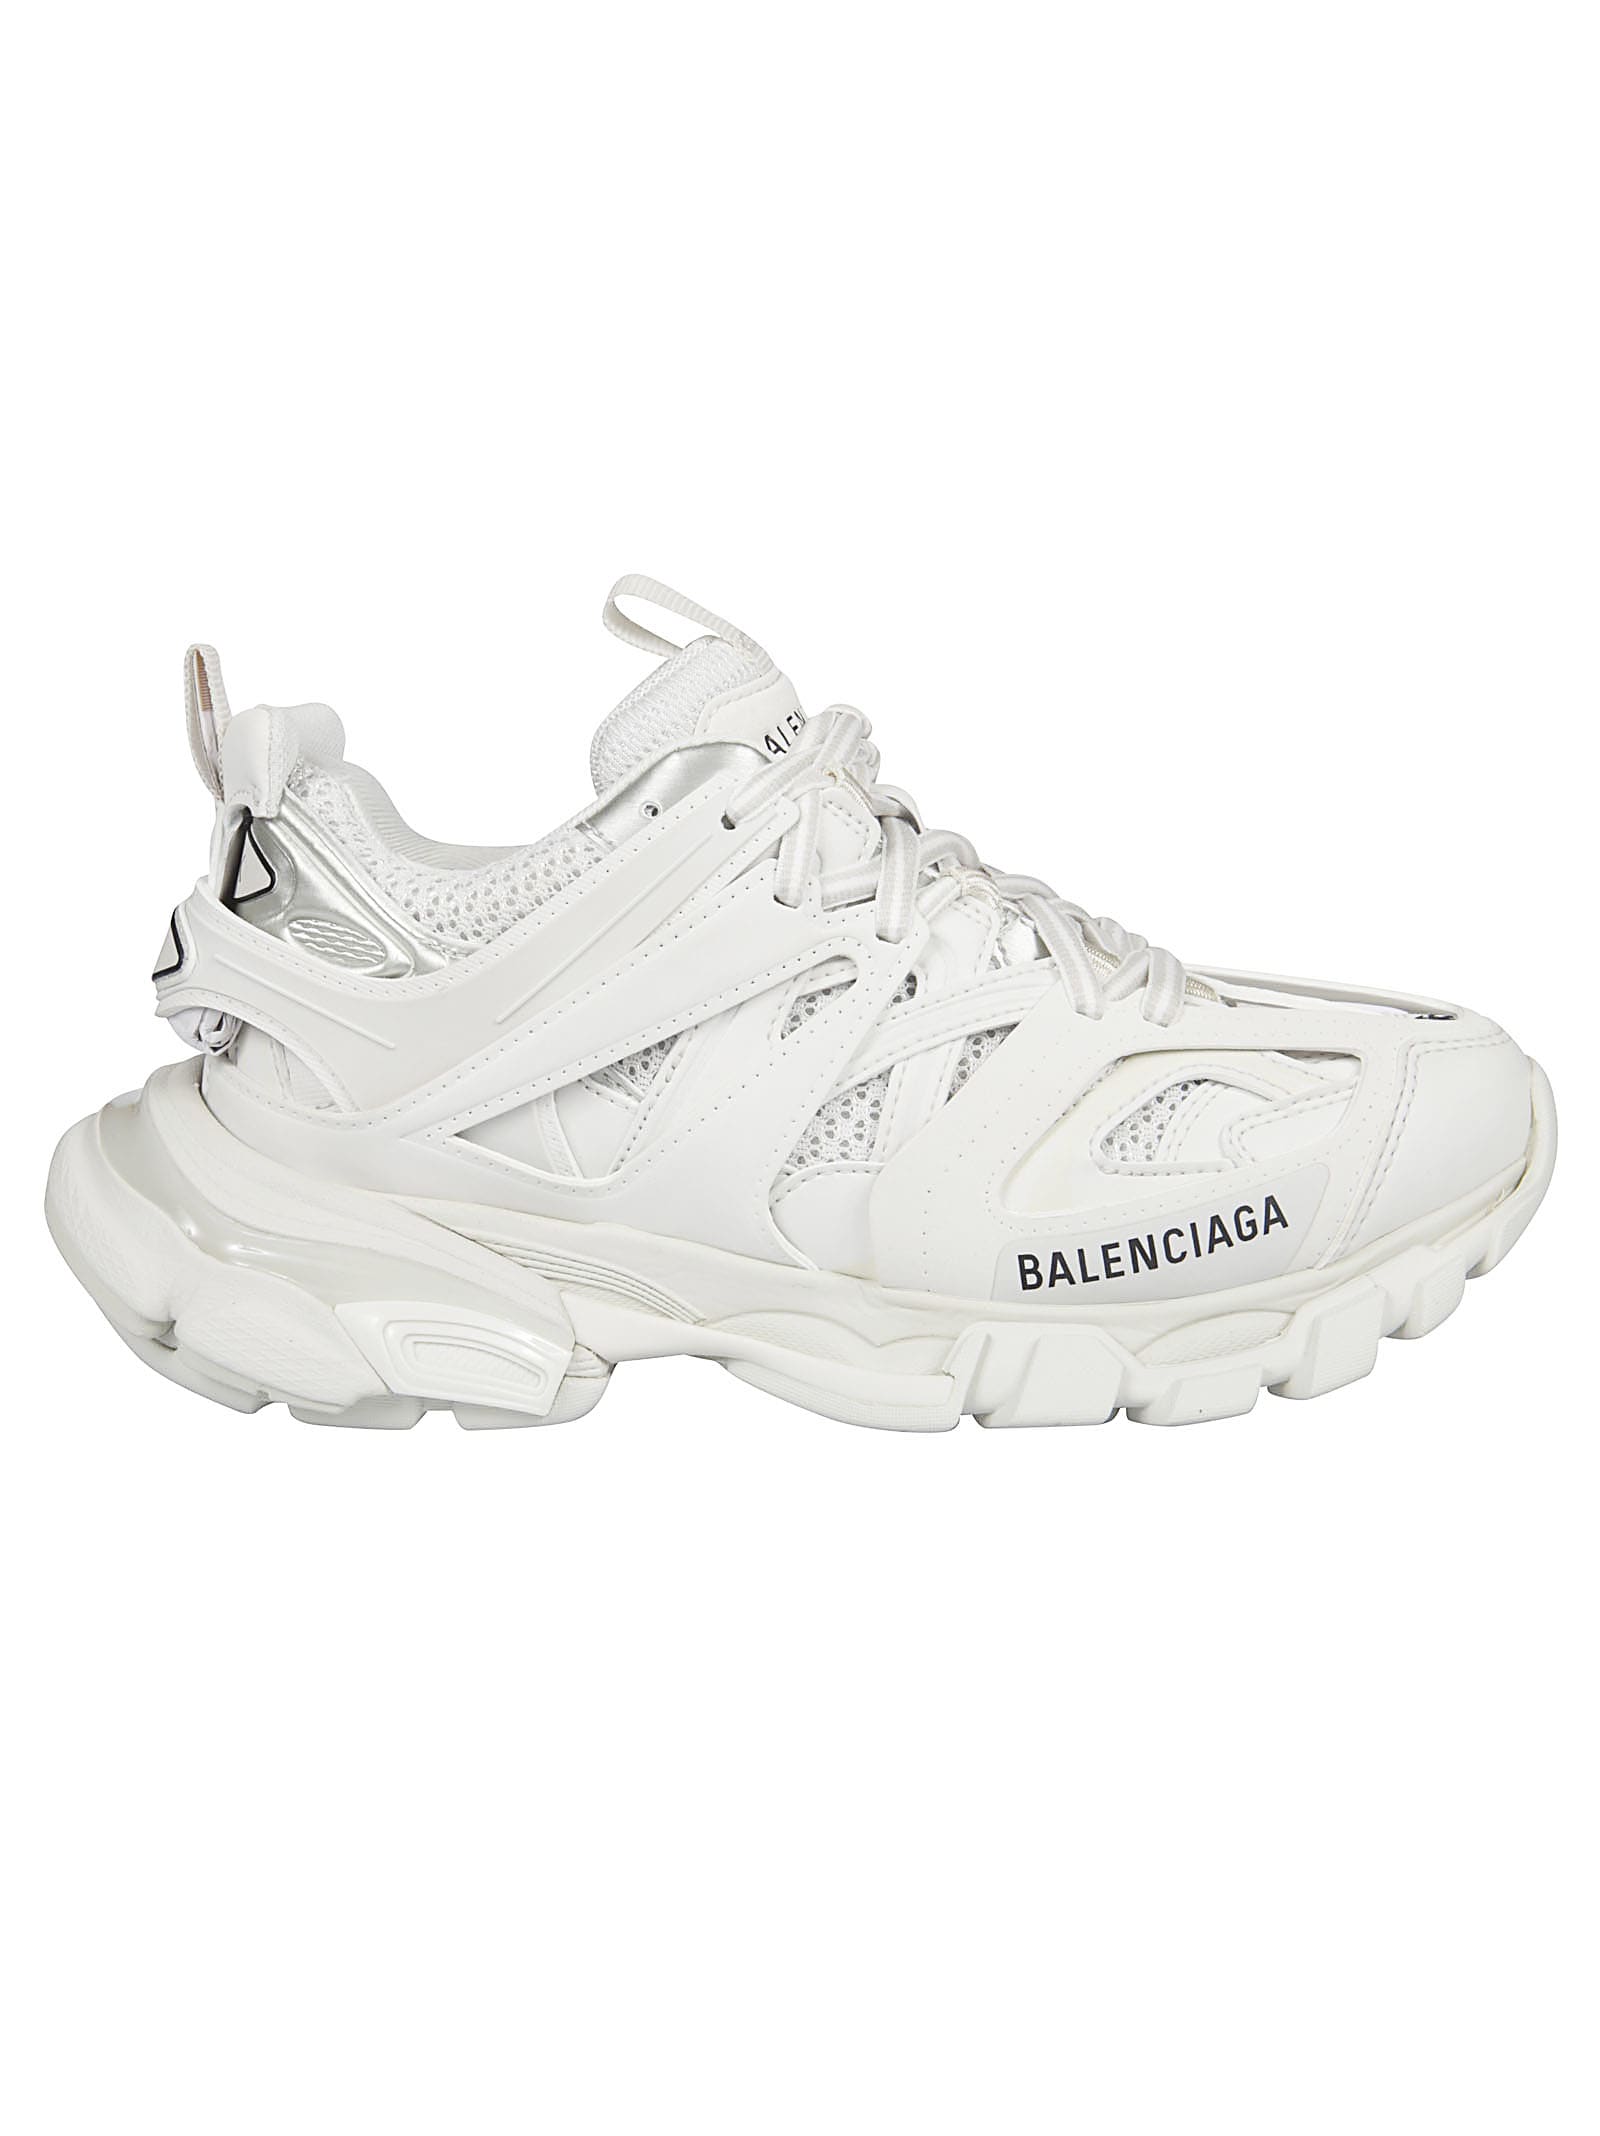 First Look of the Balenciaga Track Blue White Green Runway Sneaker